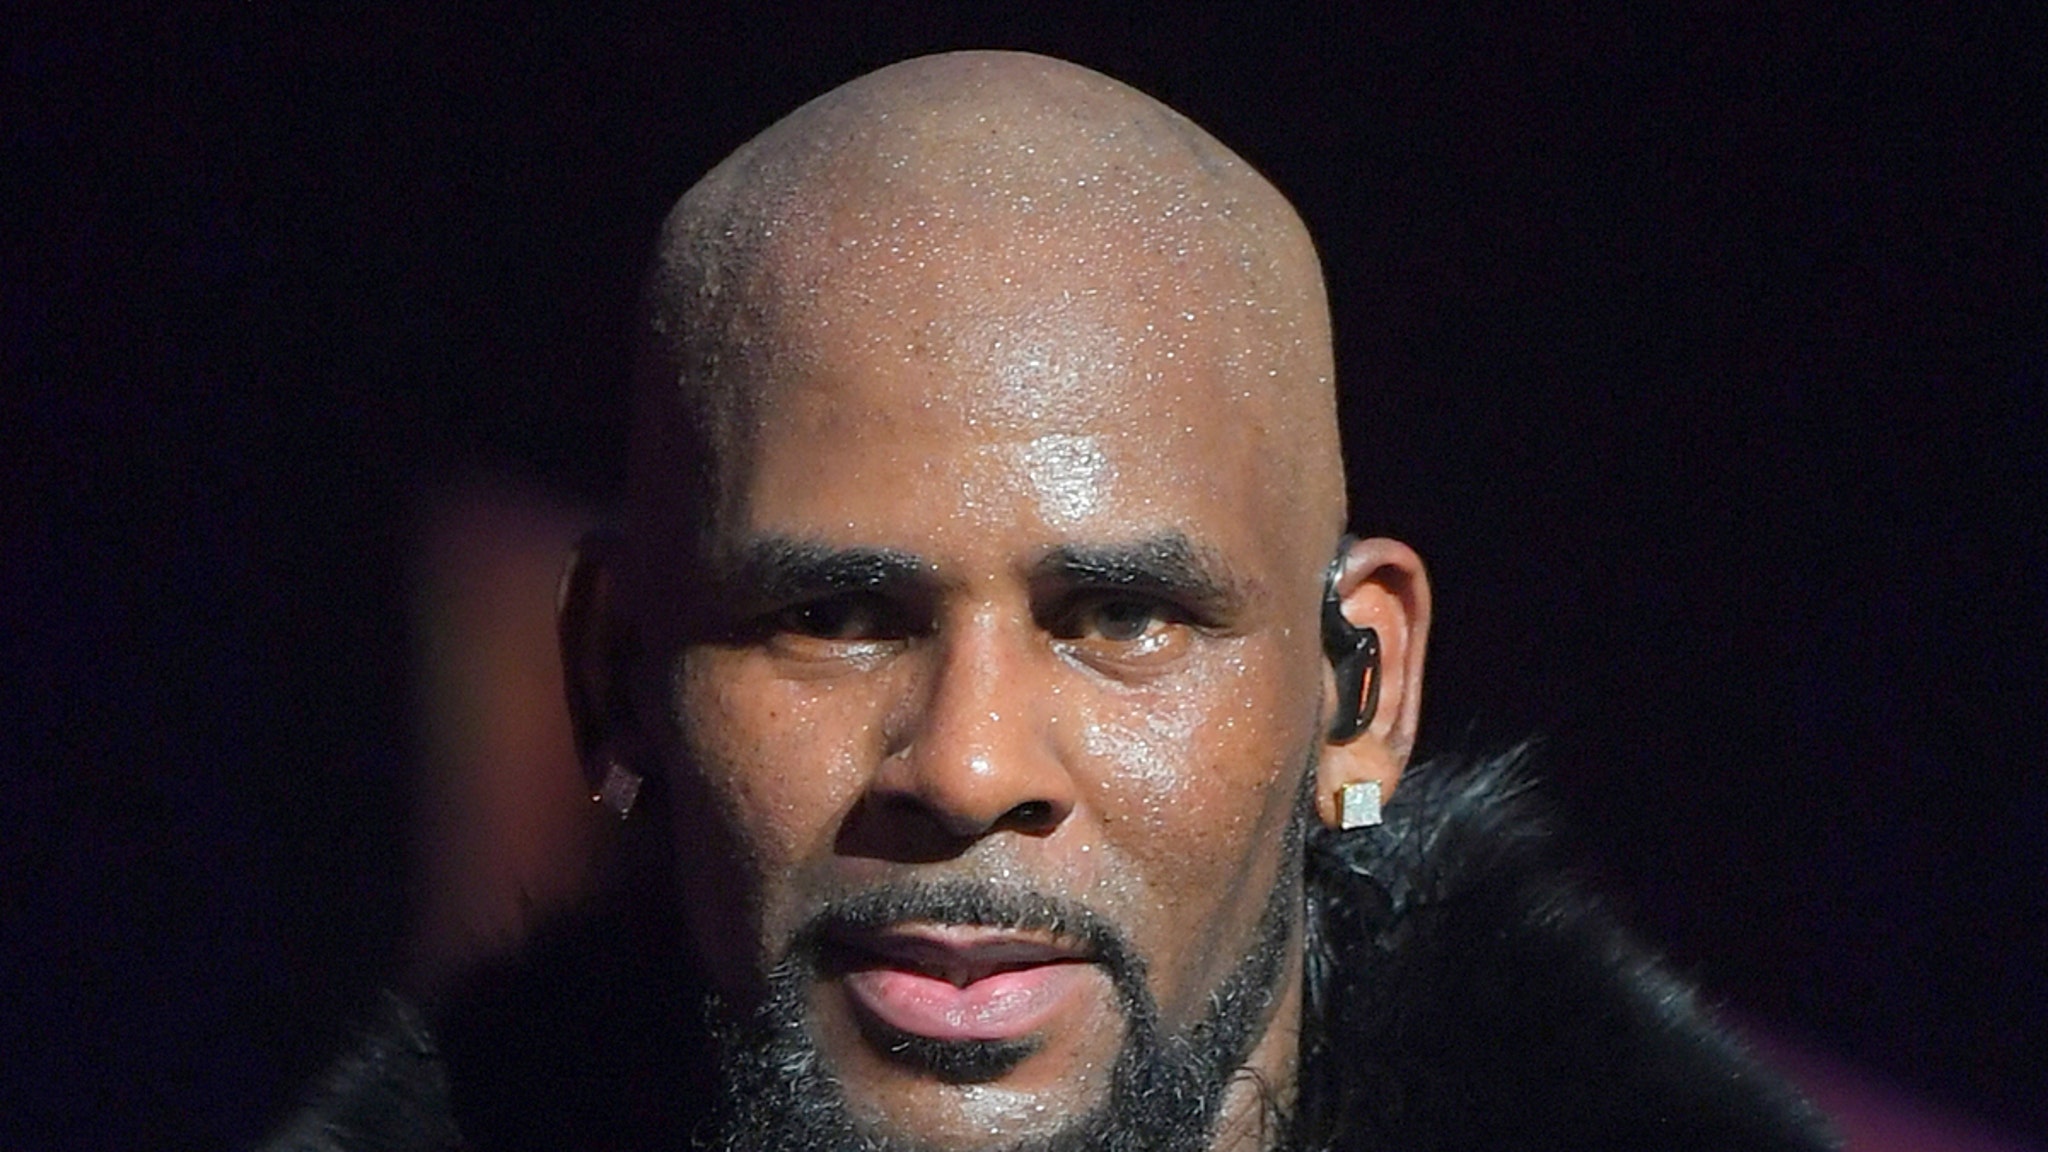 R. Kelly's Alleged Victim from 2008 Set to Testify in New Trial - TMZ : The teenager R. Kelly was accused of urinating on during his 2008 criminal trial is going to finally testify in his upcoming Chicago case, which starts on Monday.  | Tranquility 國際社群